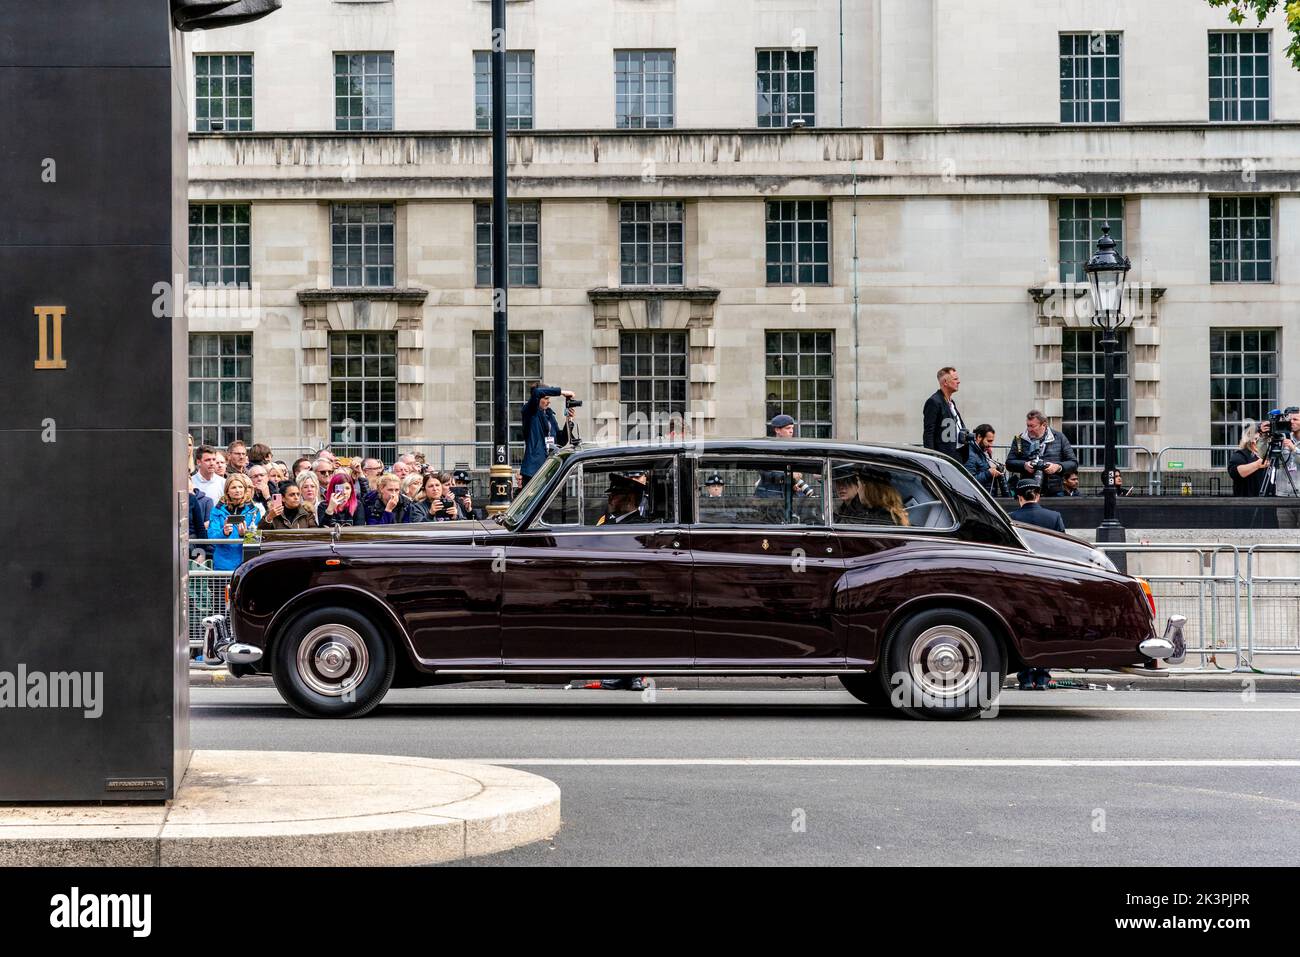 The Royal Car With Princess Beatrice and Princess Eugenie Follows The Coffin Of Queen Elizabeth II As The Funeral Procession Travels Up Whitehall Stock Photo